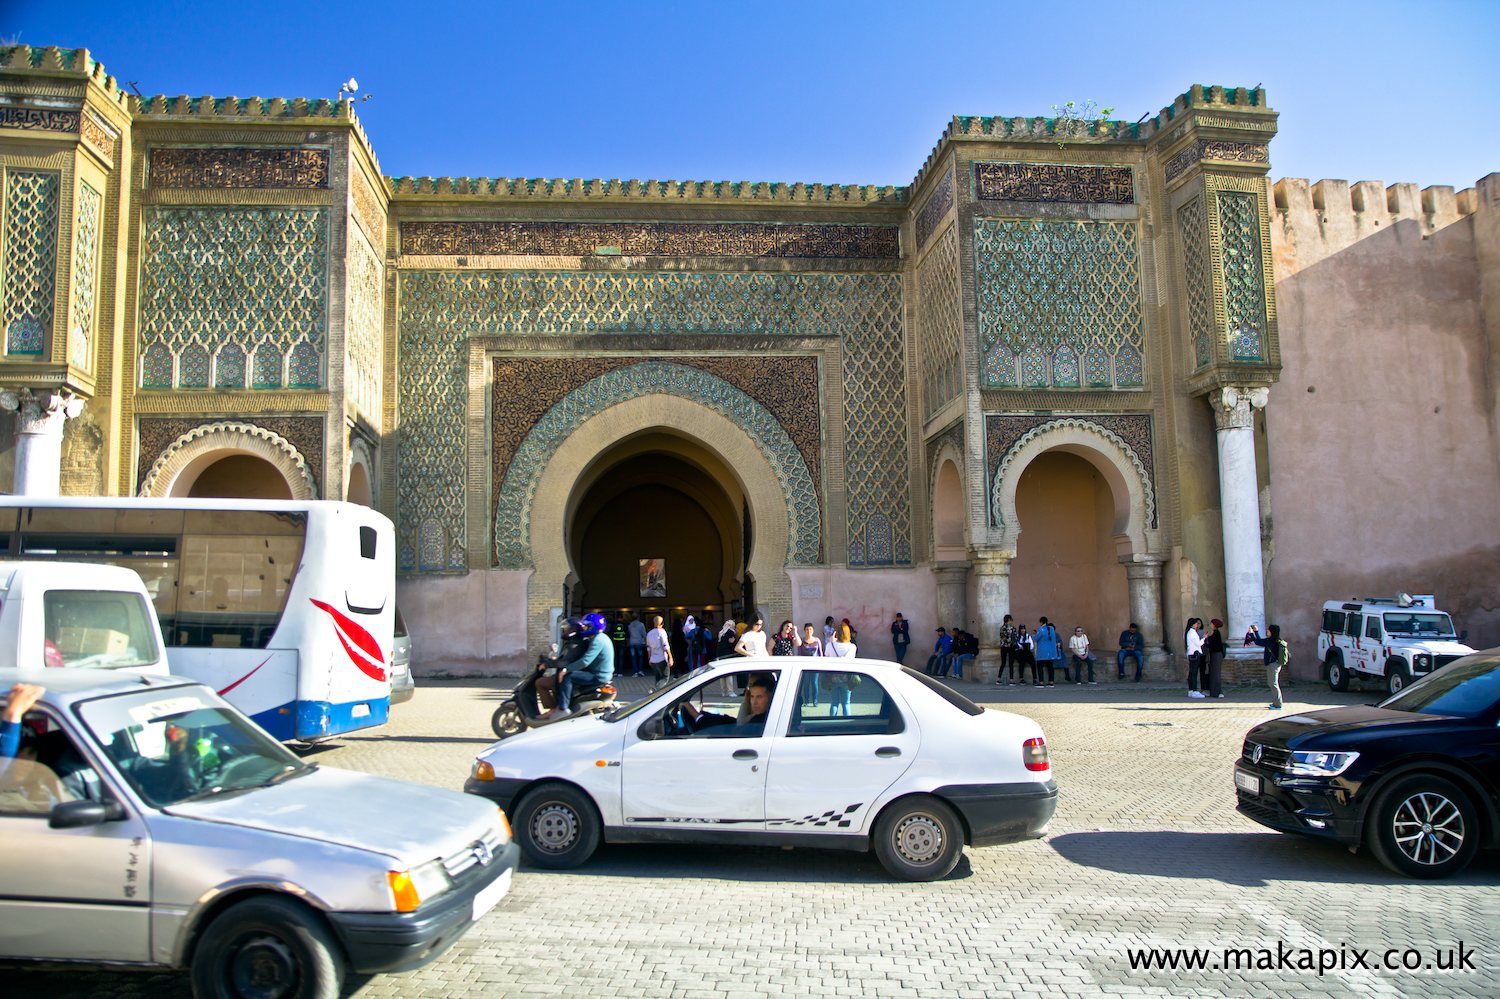 Meknes is one of the four Imperial cities of Morocco